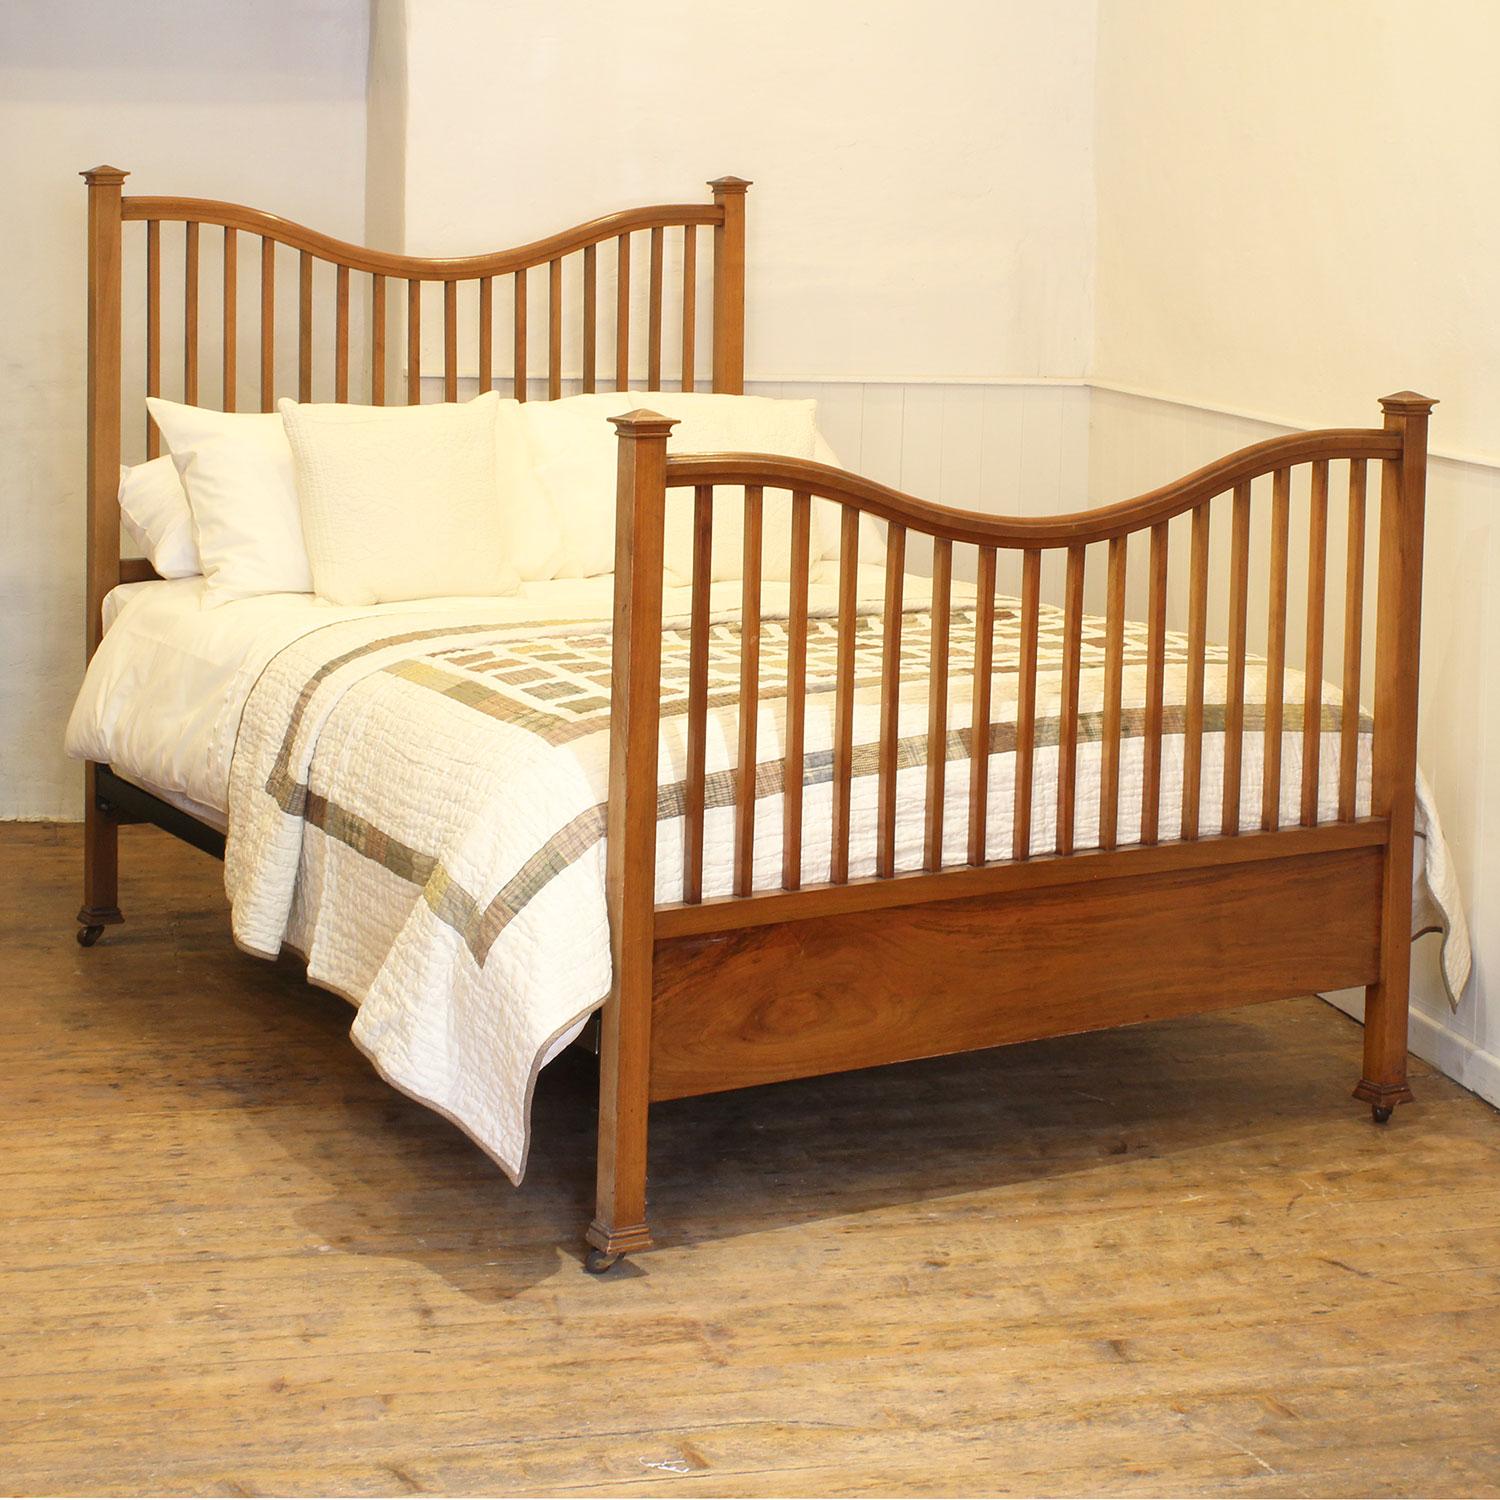 An atttractive Edwardian antique bed with square pagoda caps, slatted design and serpentine top rails.

This bed accepts a standard double, 4ft 6in (54 in), base and mattress set.

The price is for the bed frame and a firm bed base. 

The